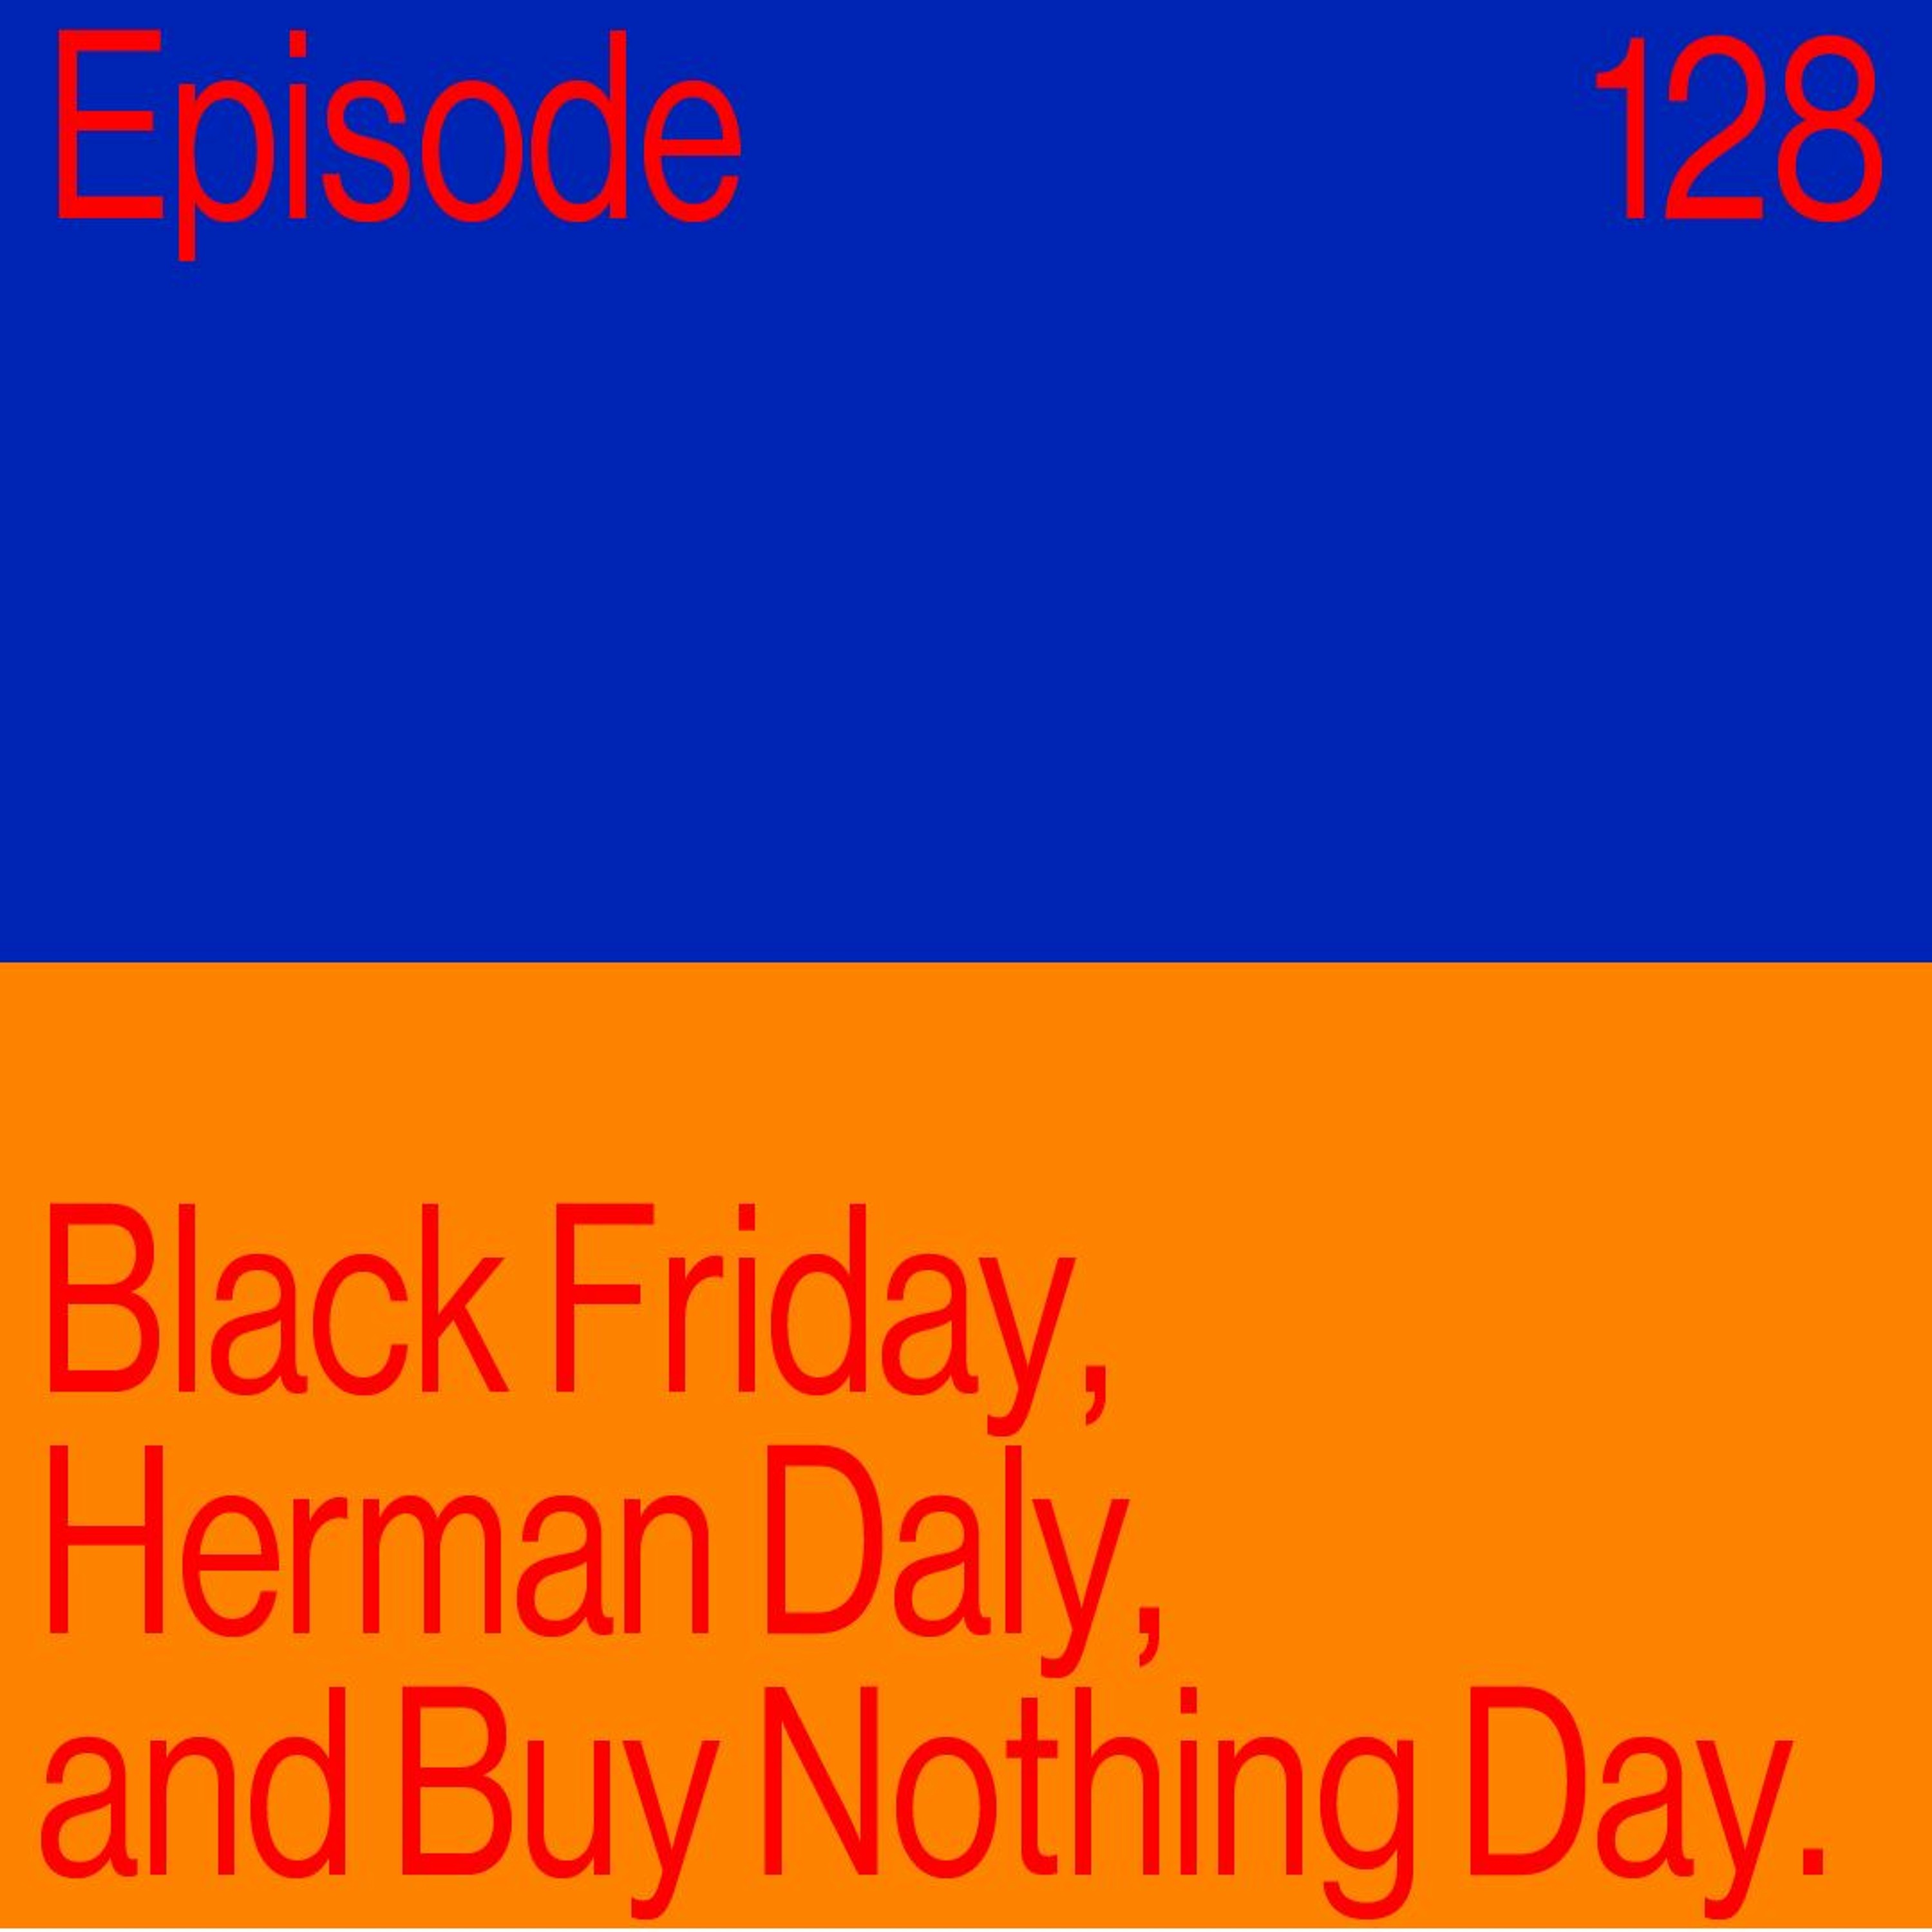 Episode 128: Black Friday, Herman Daly, and Buy Nothing Day